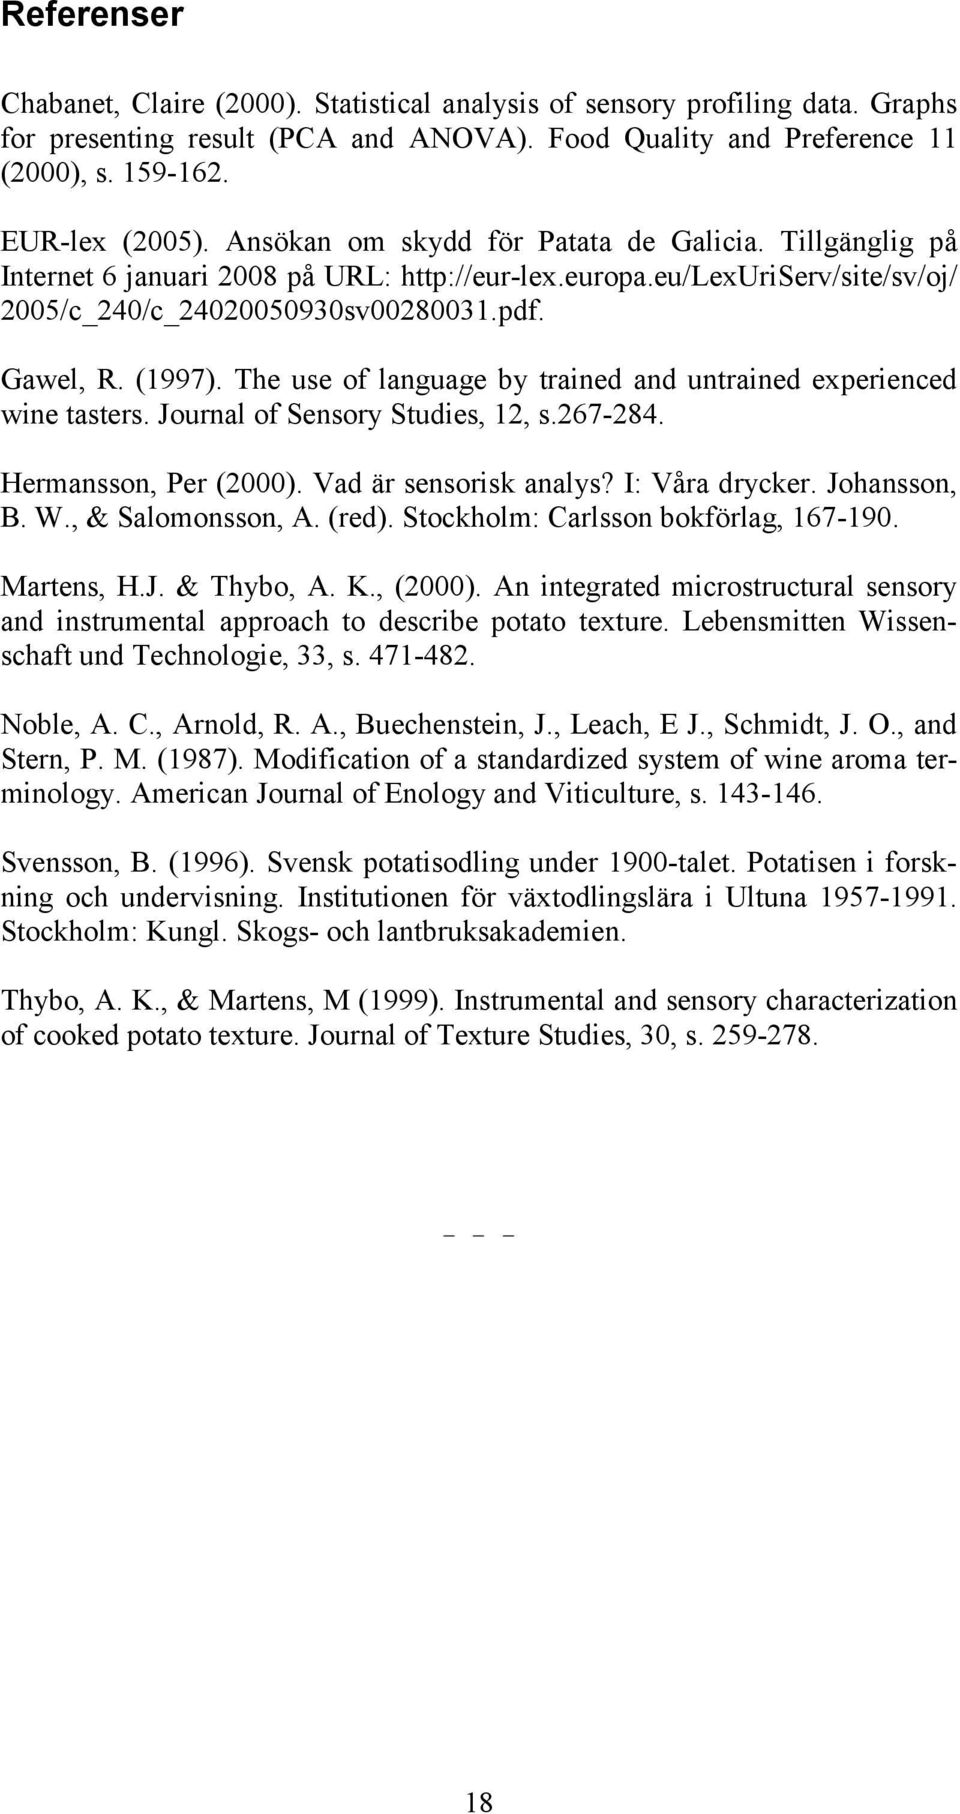 The use of language by trained and untrained experienced wine tasters. Journal of Sensory Studies, 1, s.7-8. Hermansson, Per (000). Vad är sensorisk analys? I: Våra drycker. Johansson, B. W.